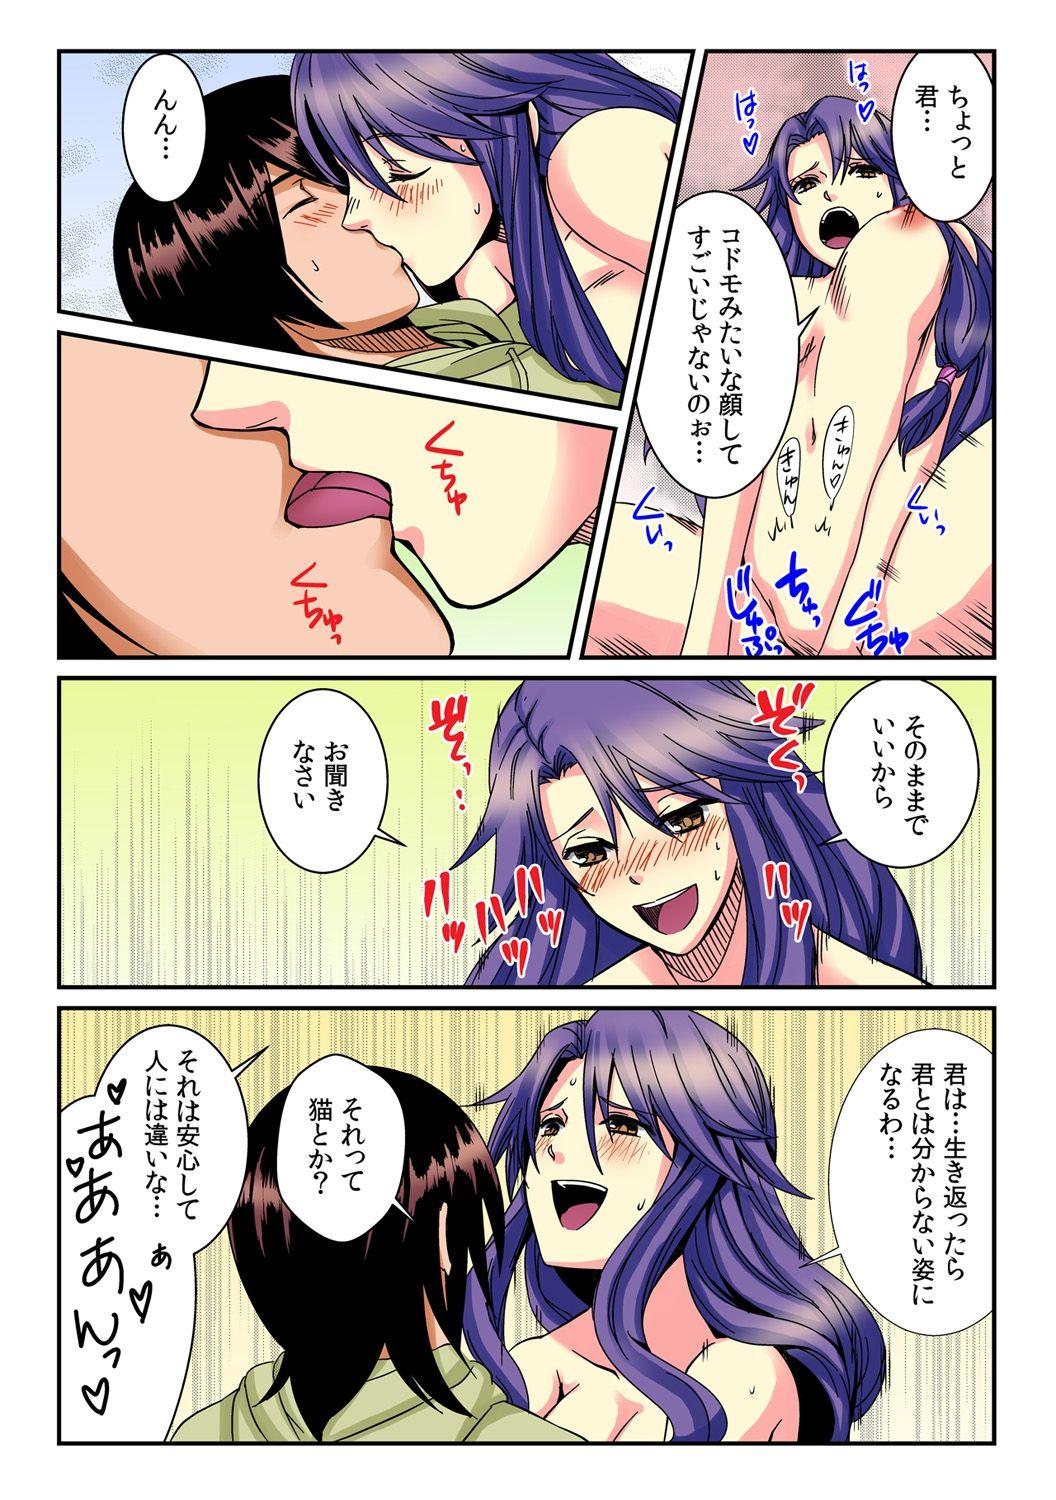 Hunks [Akagi Gijou / Akahige] I became a girl- and I definitely can't let anyone find out! (Full color) 1 Casal - Page 10